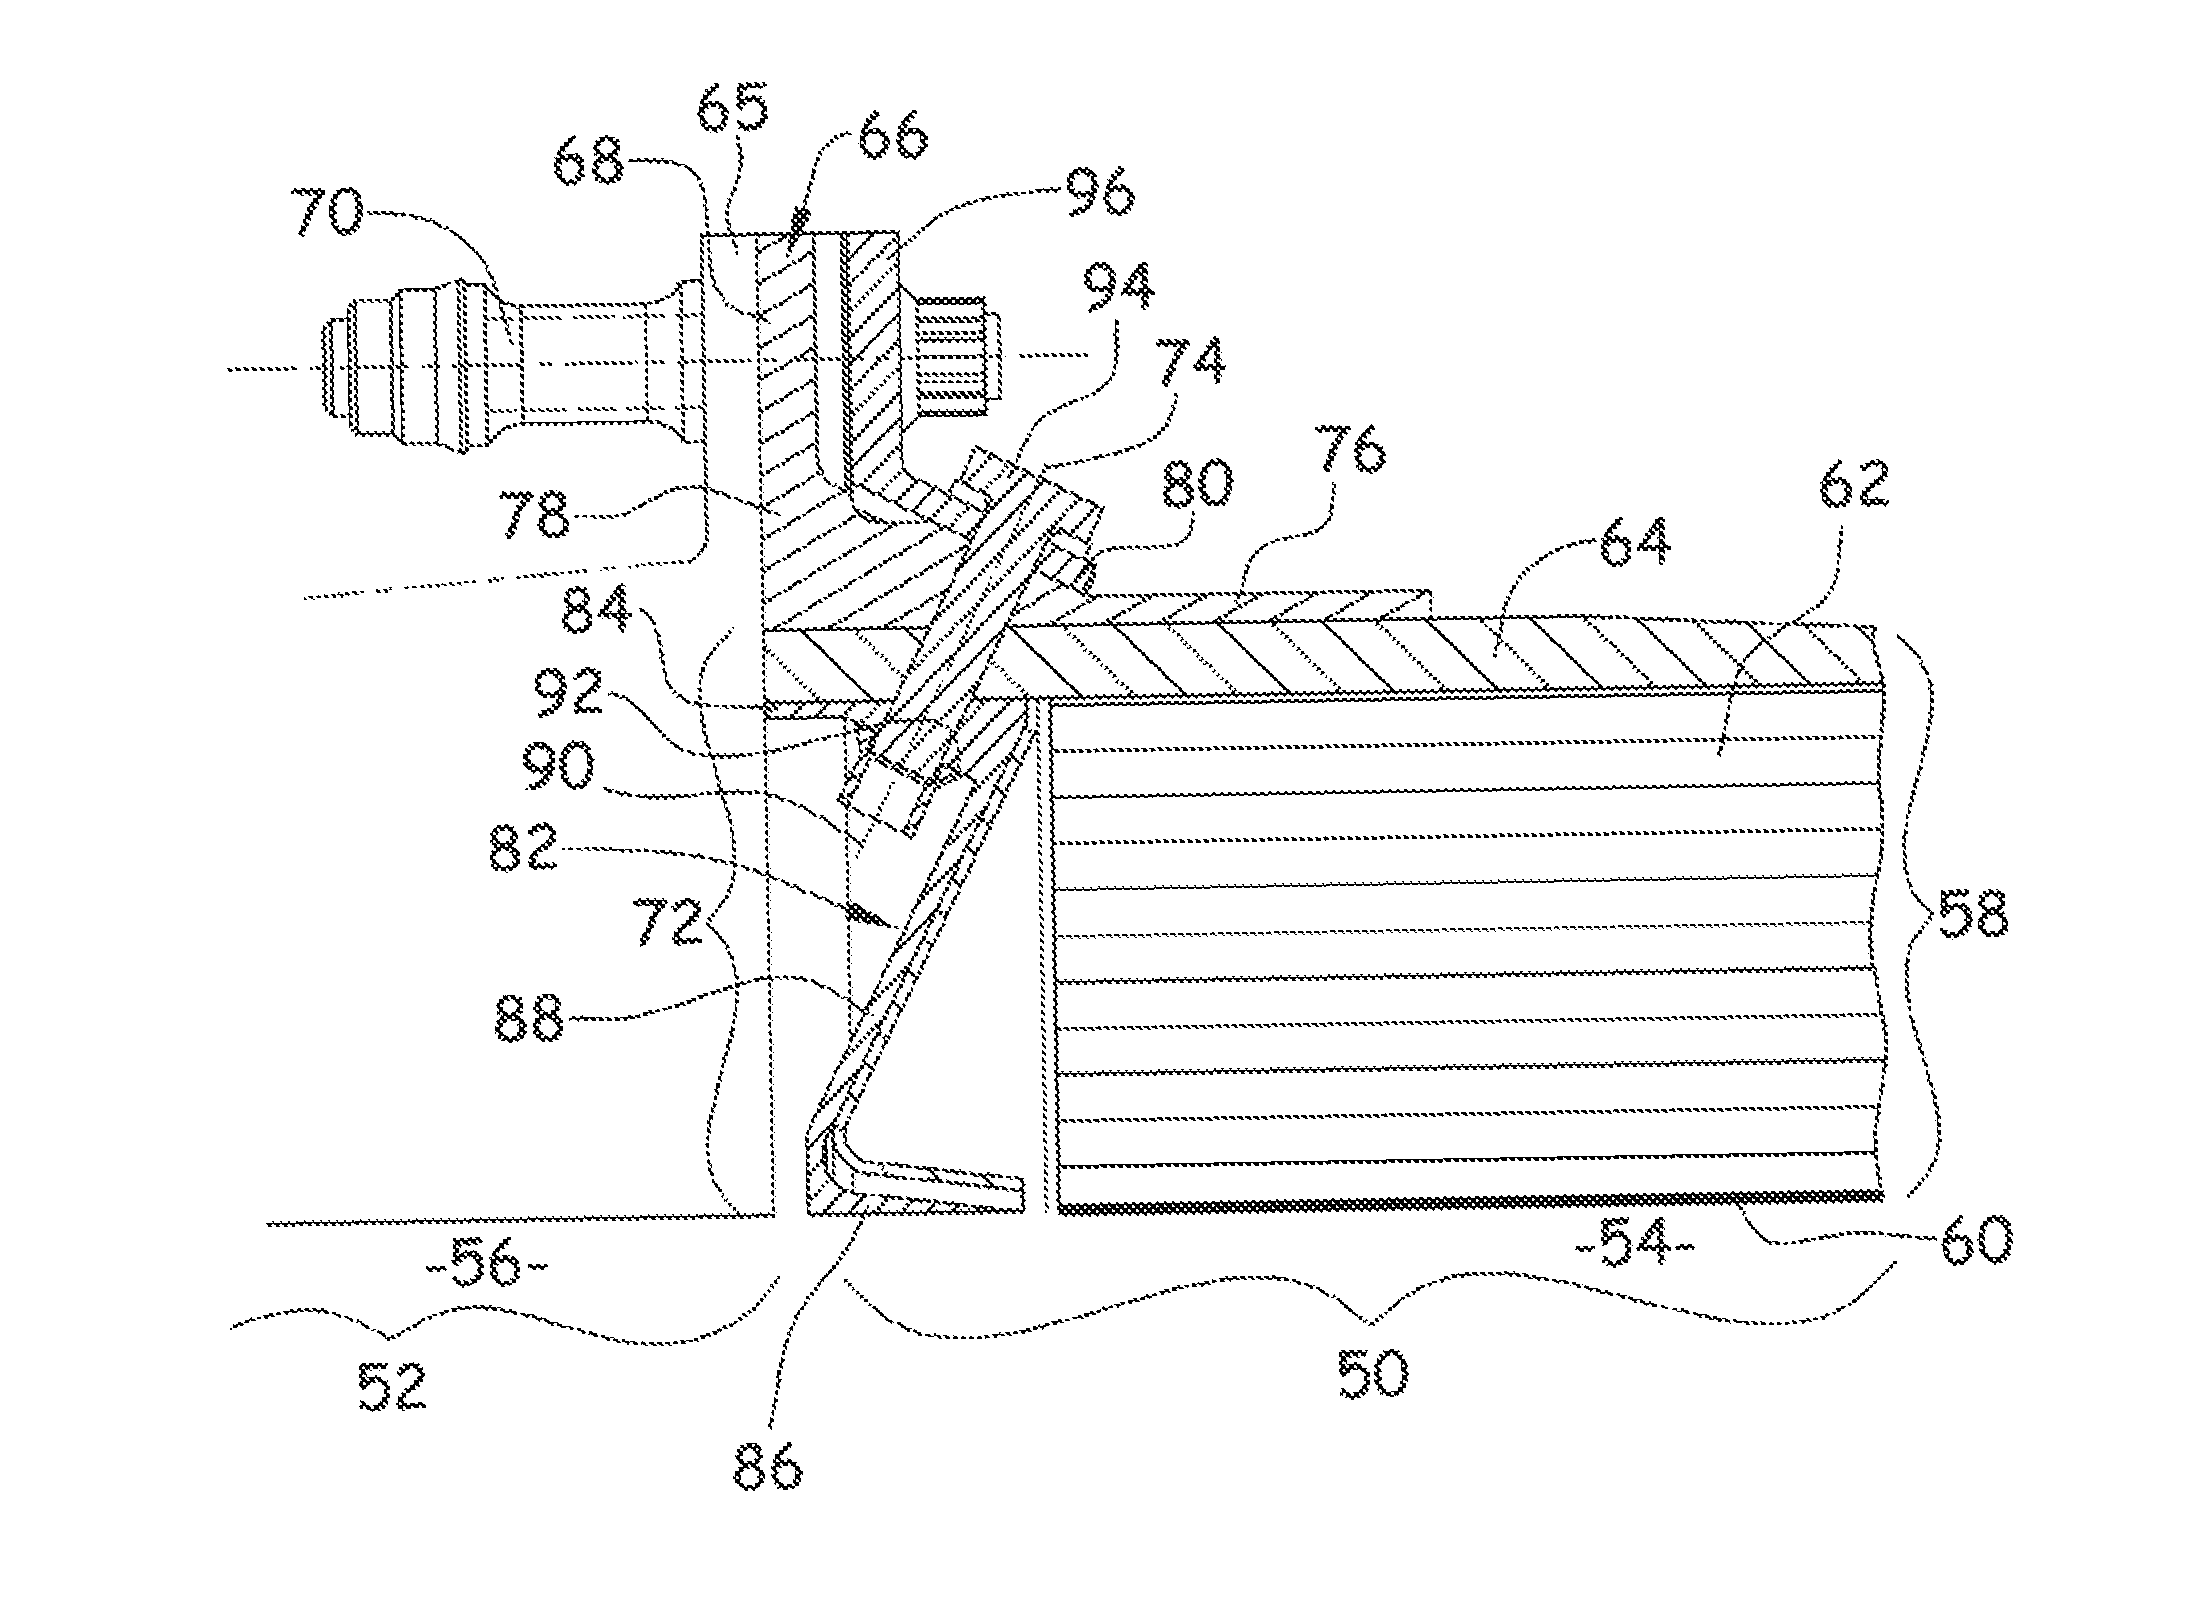 Device for connecting an air inlet with an aircraft nacelle actuator assembly